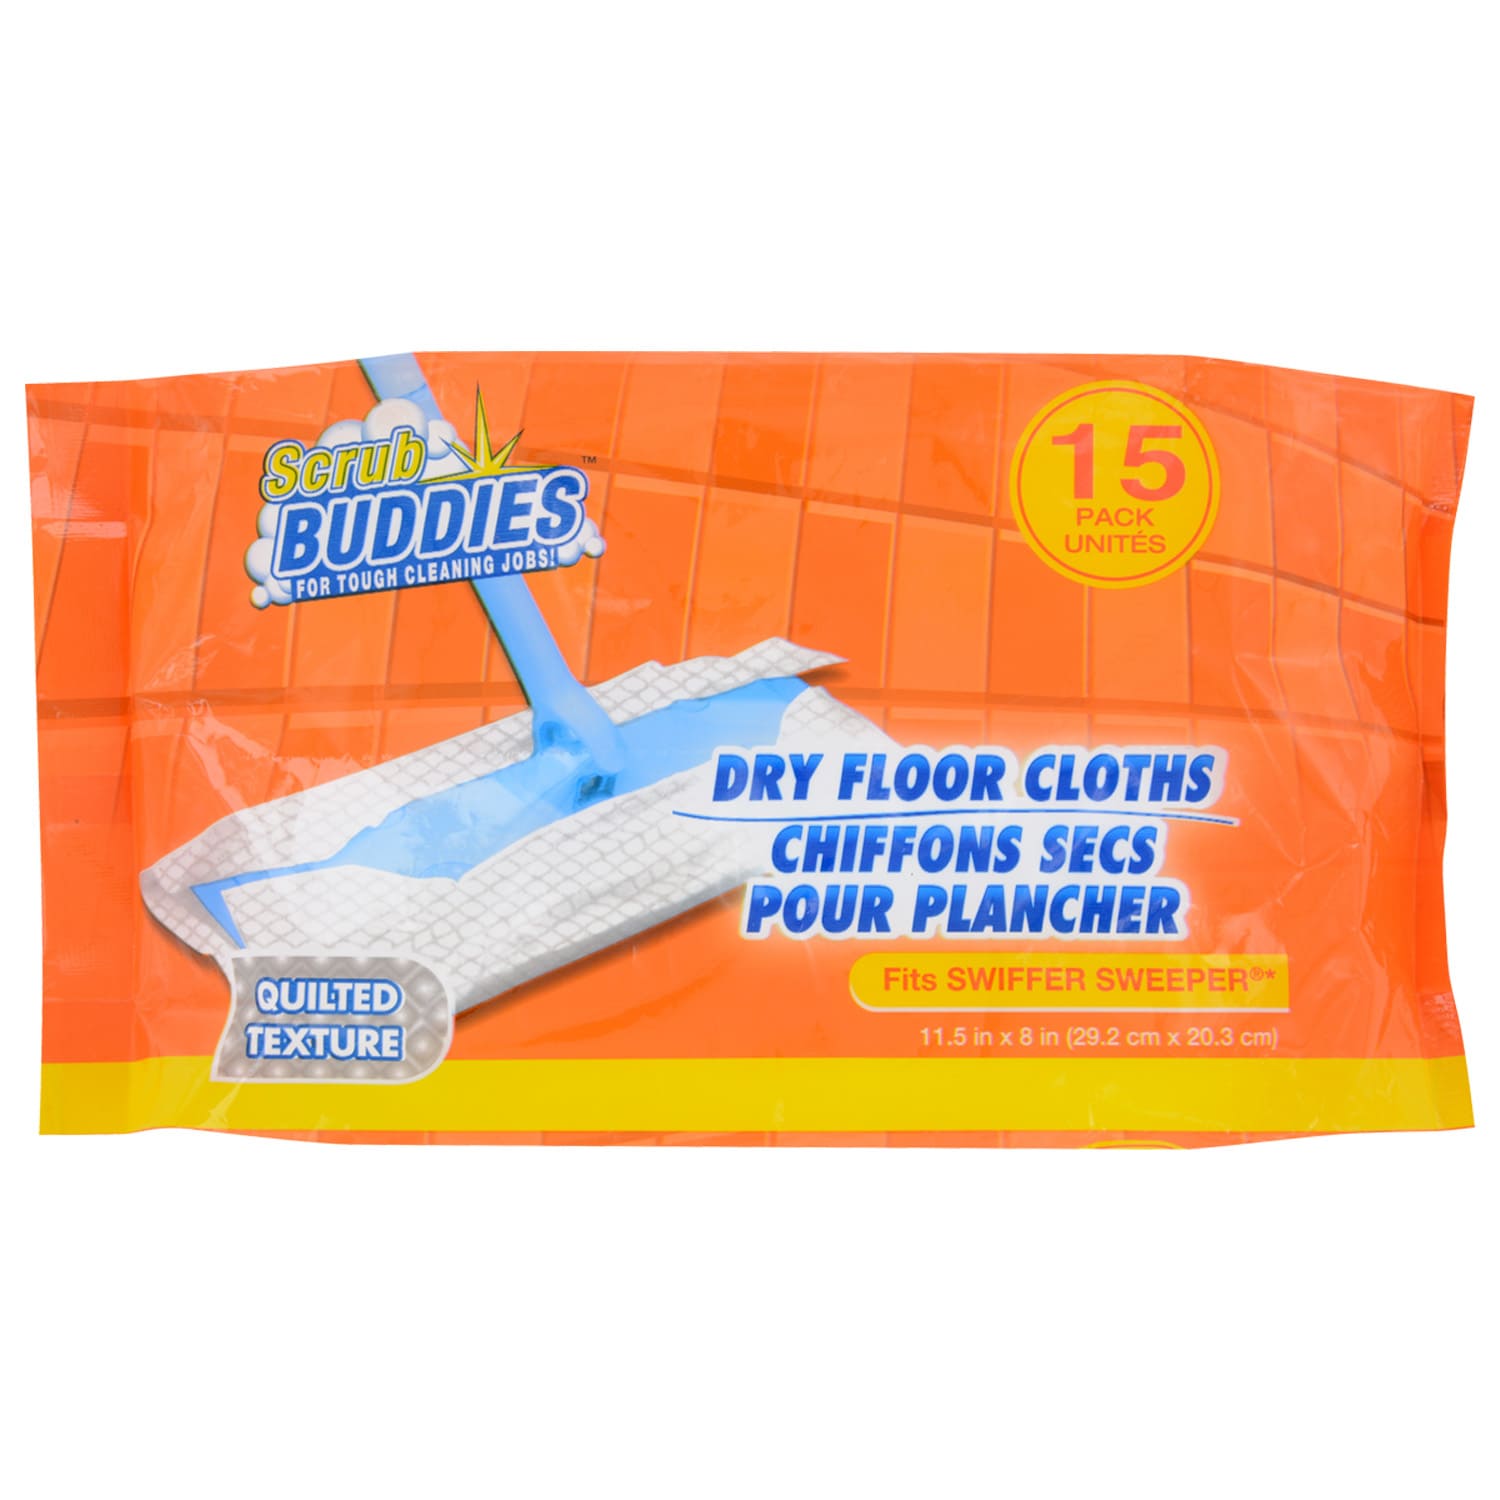 Scrub Buddies Dry Floor Cloths Fits Swiffer Sweeper 15pack X 4 60 for sale online 